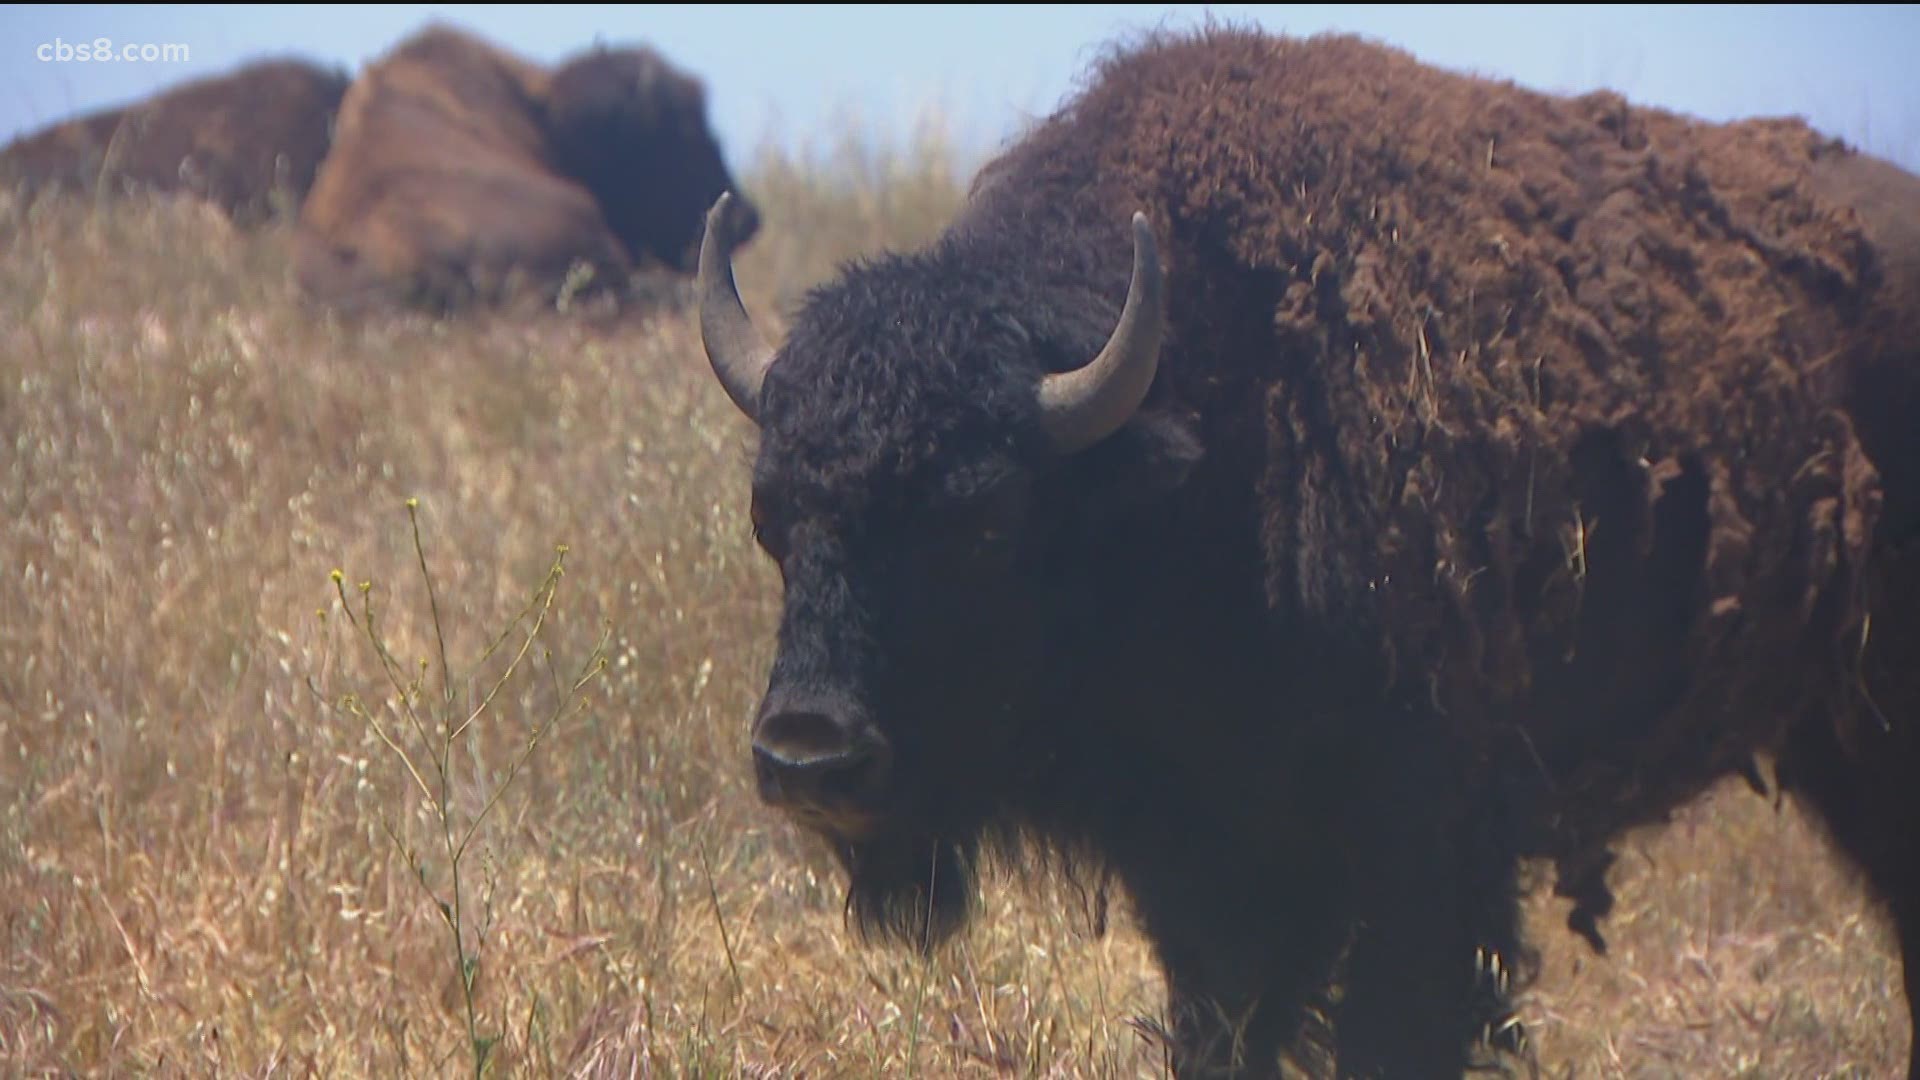 Camp Pendleton takes a hands-off approach to Bison. Keeping an eye on them but letting their population fluctuate as it would naturally.